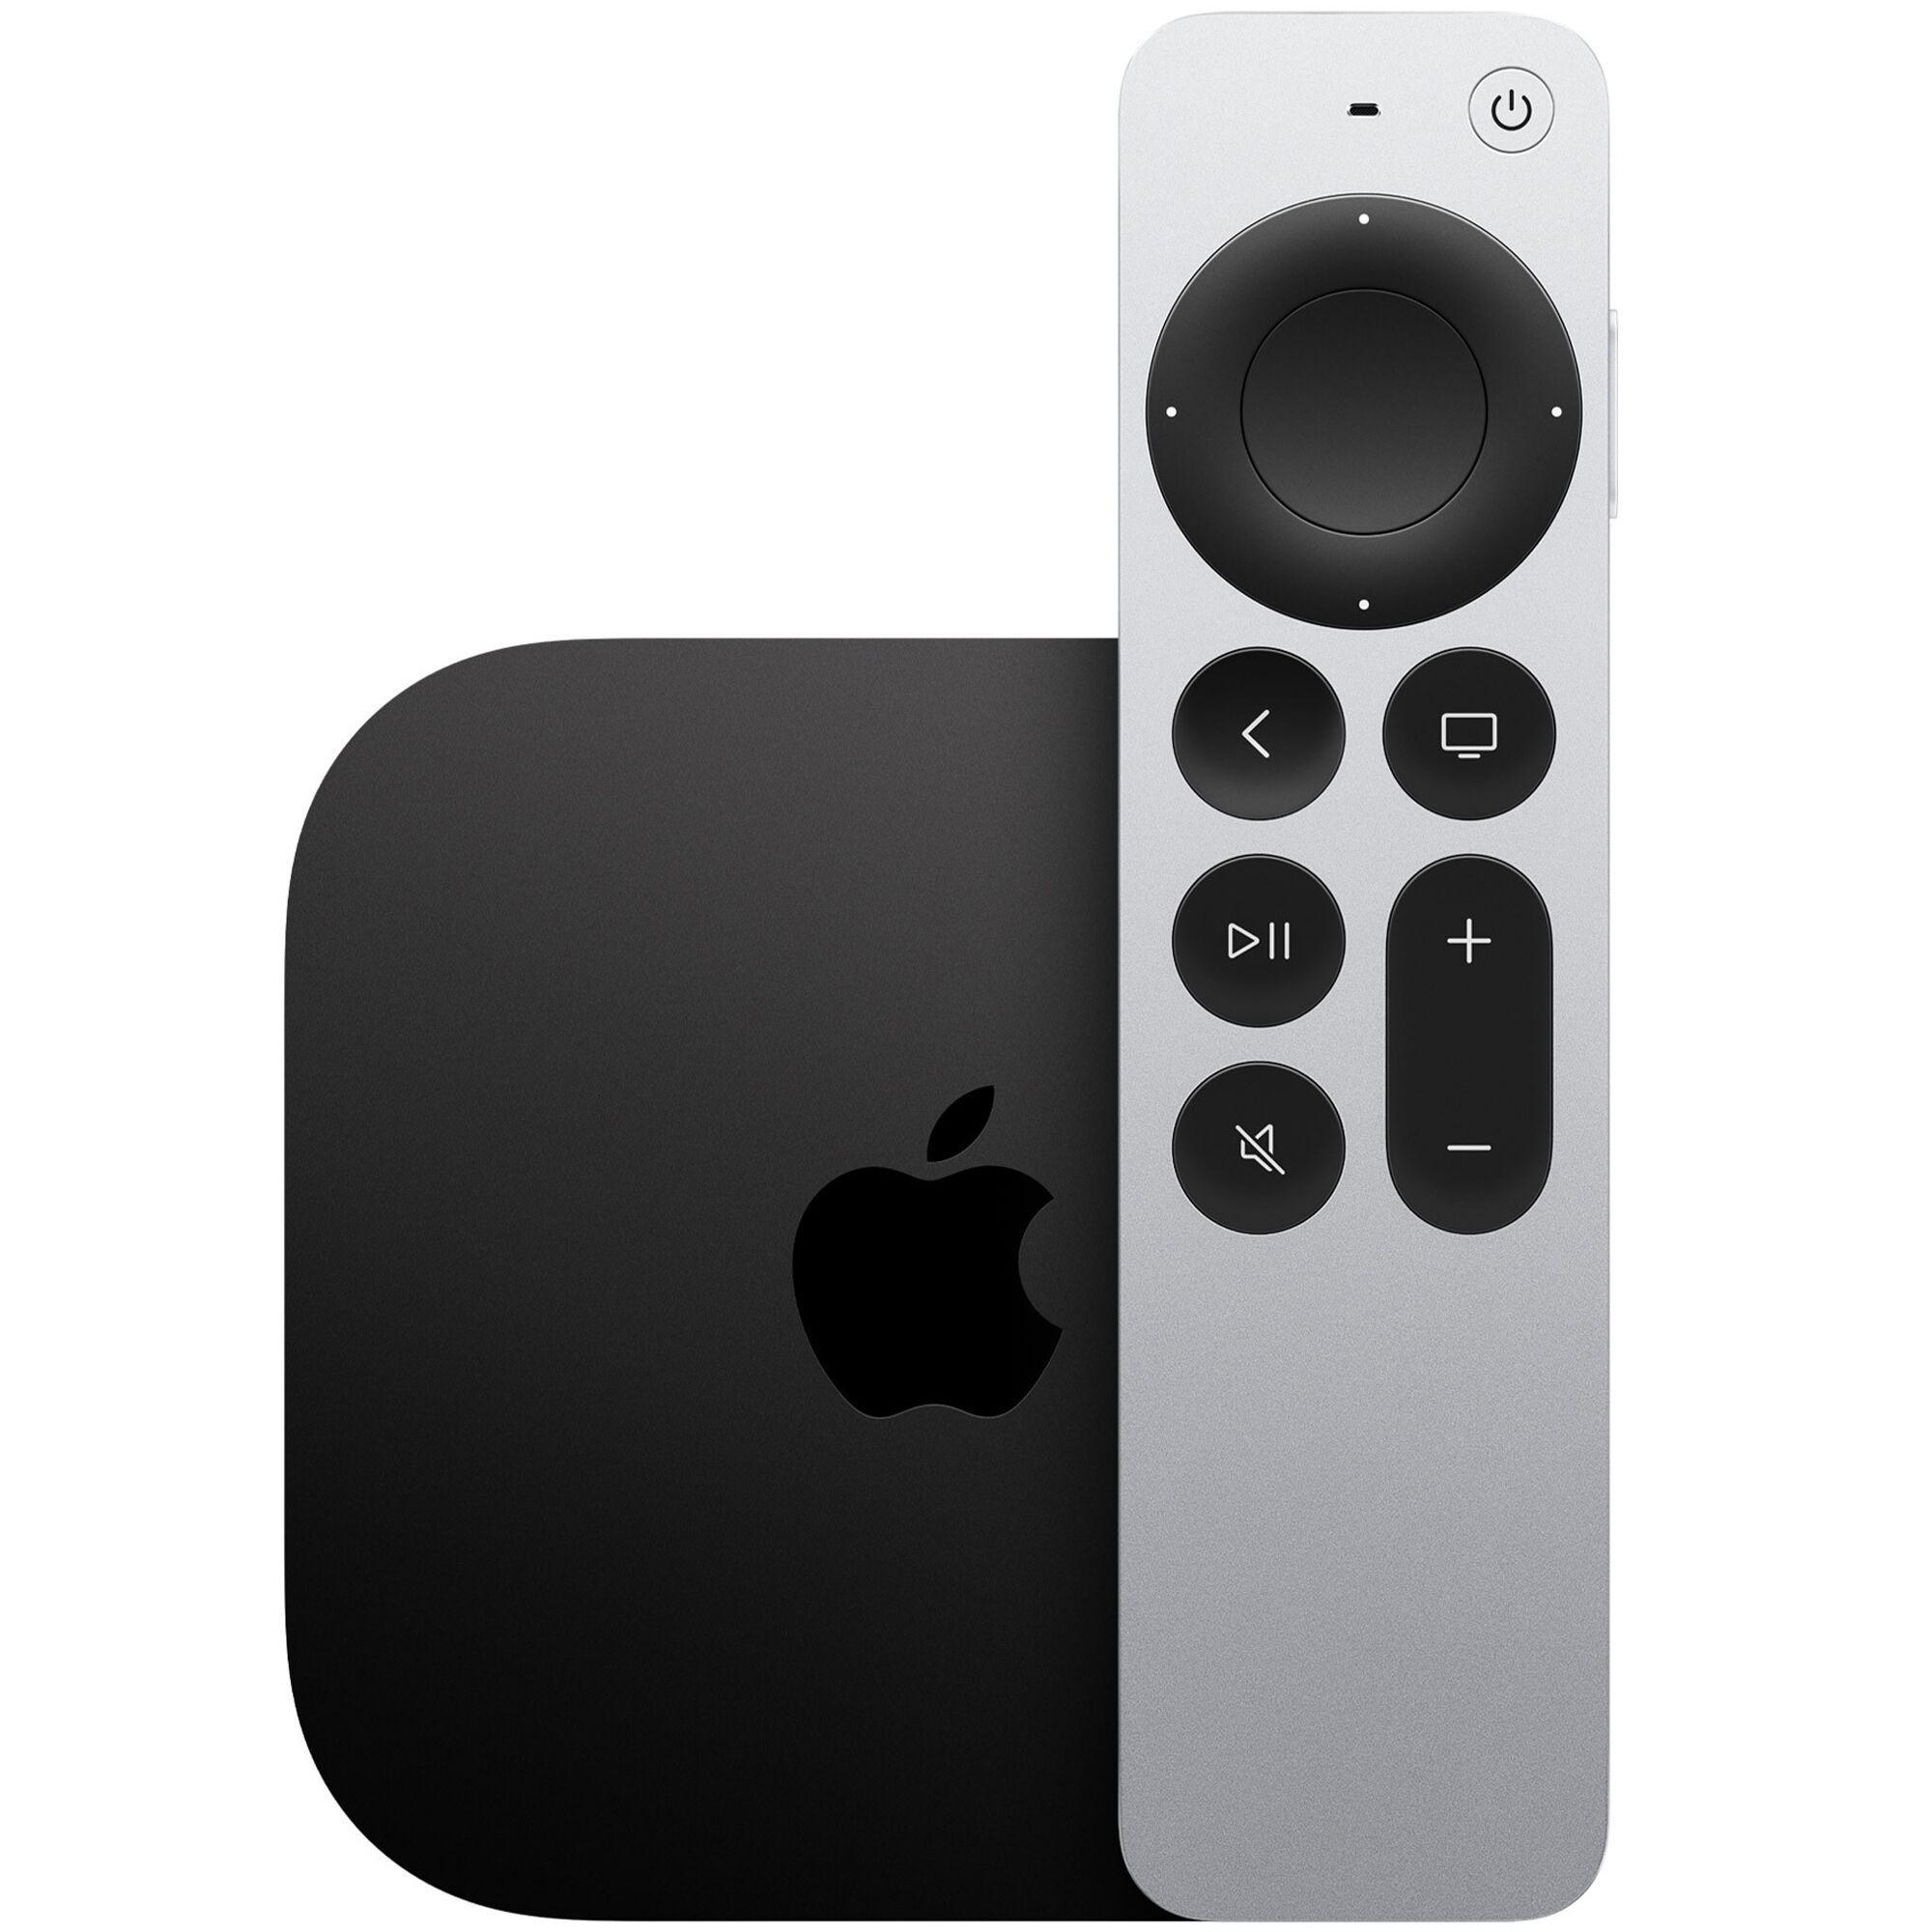 Apple TV 4K, 128GB, Wifi + Ethernet with Thread Networking support